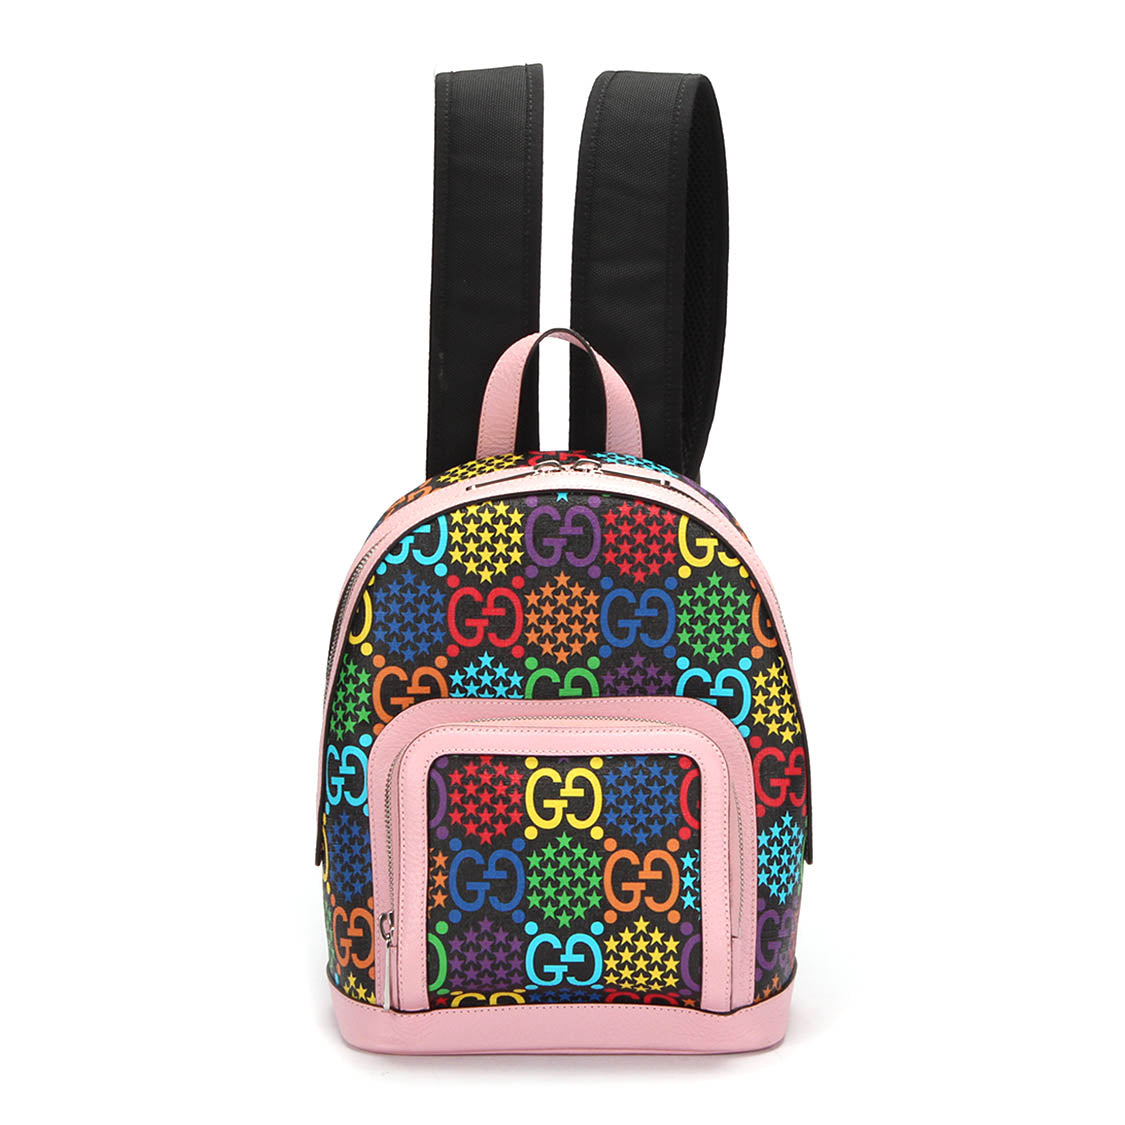 GG Psychedelic Backpack